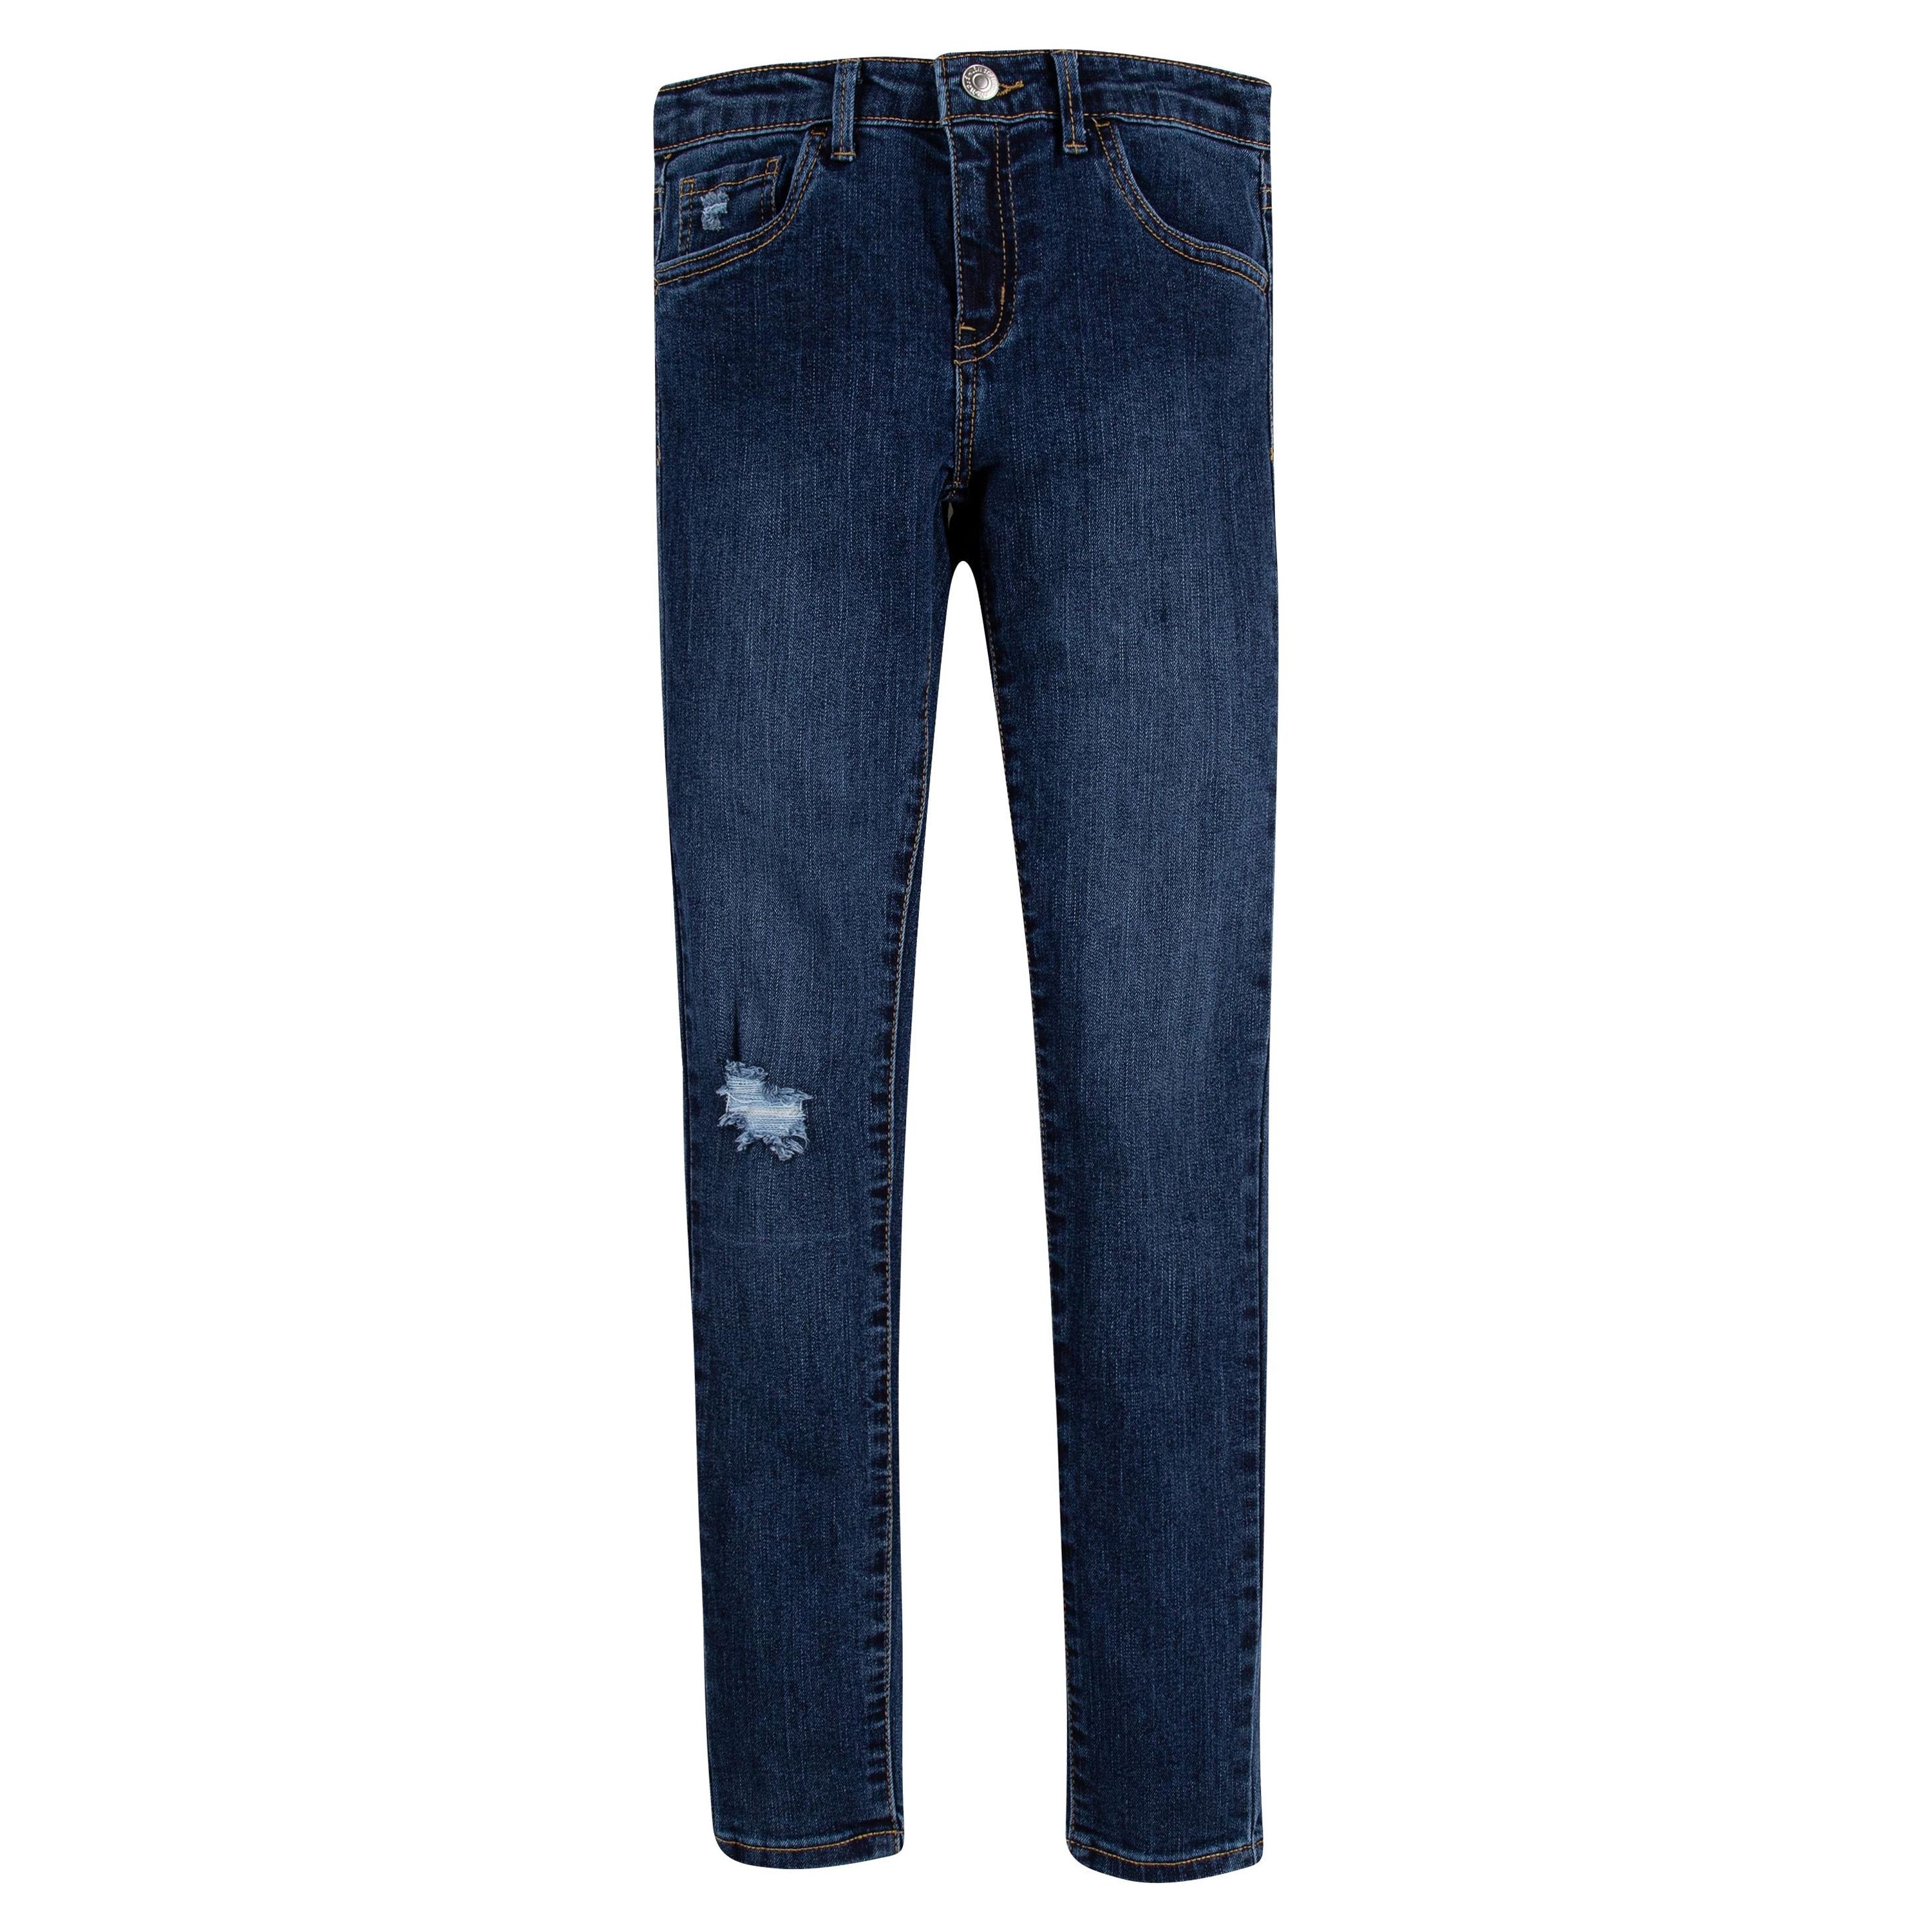 Levi's Girls' 710 Super Skinny Fit Jeans, Sizes 4-16 - image 1 of 6